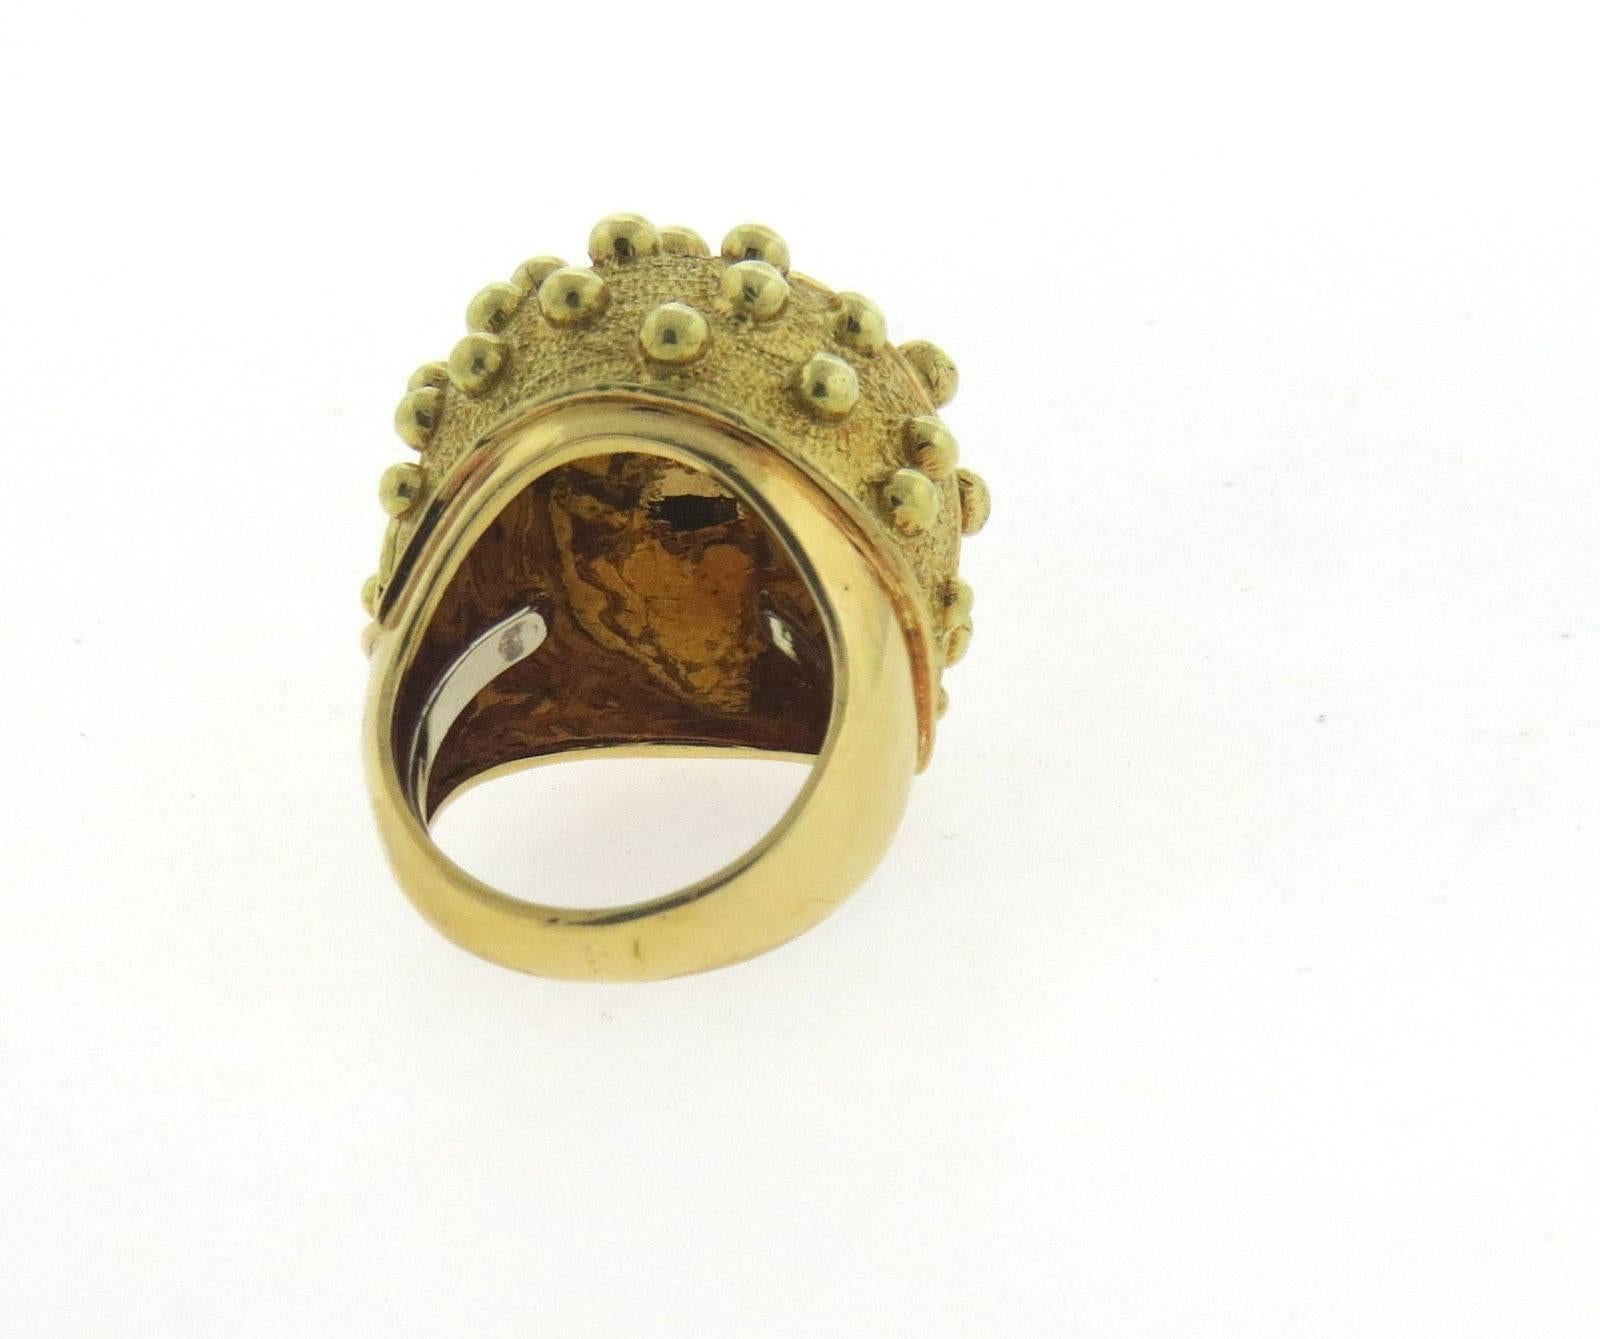 An 18k yellow gold dome ring.  Created by David Webb, the ring is a size 6, ring top is  24mm x 23mm, sits approx. 15mm from the finger.  Marked: Webb 18k.  The weight of the ring is 26.6 grams.